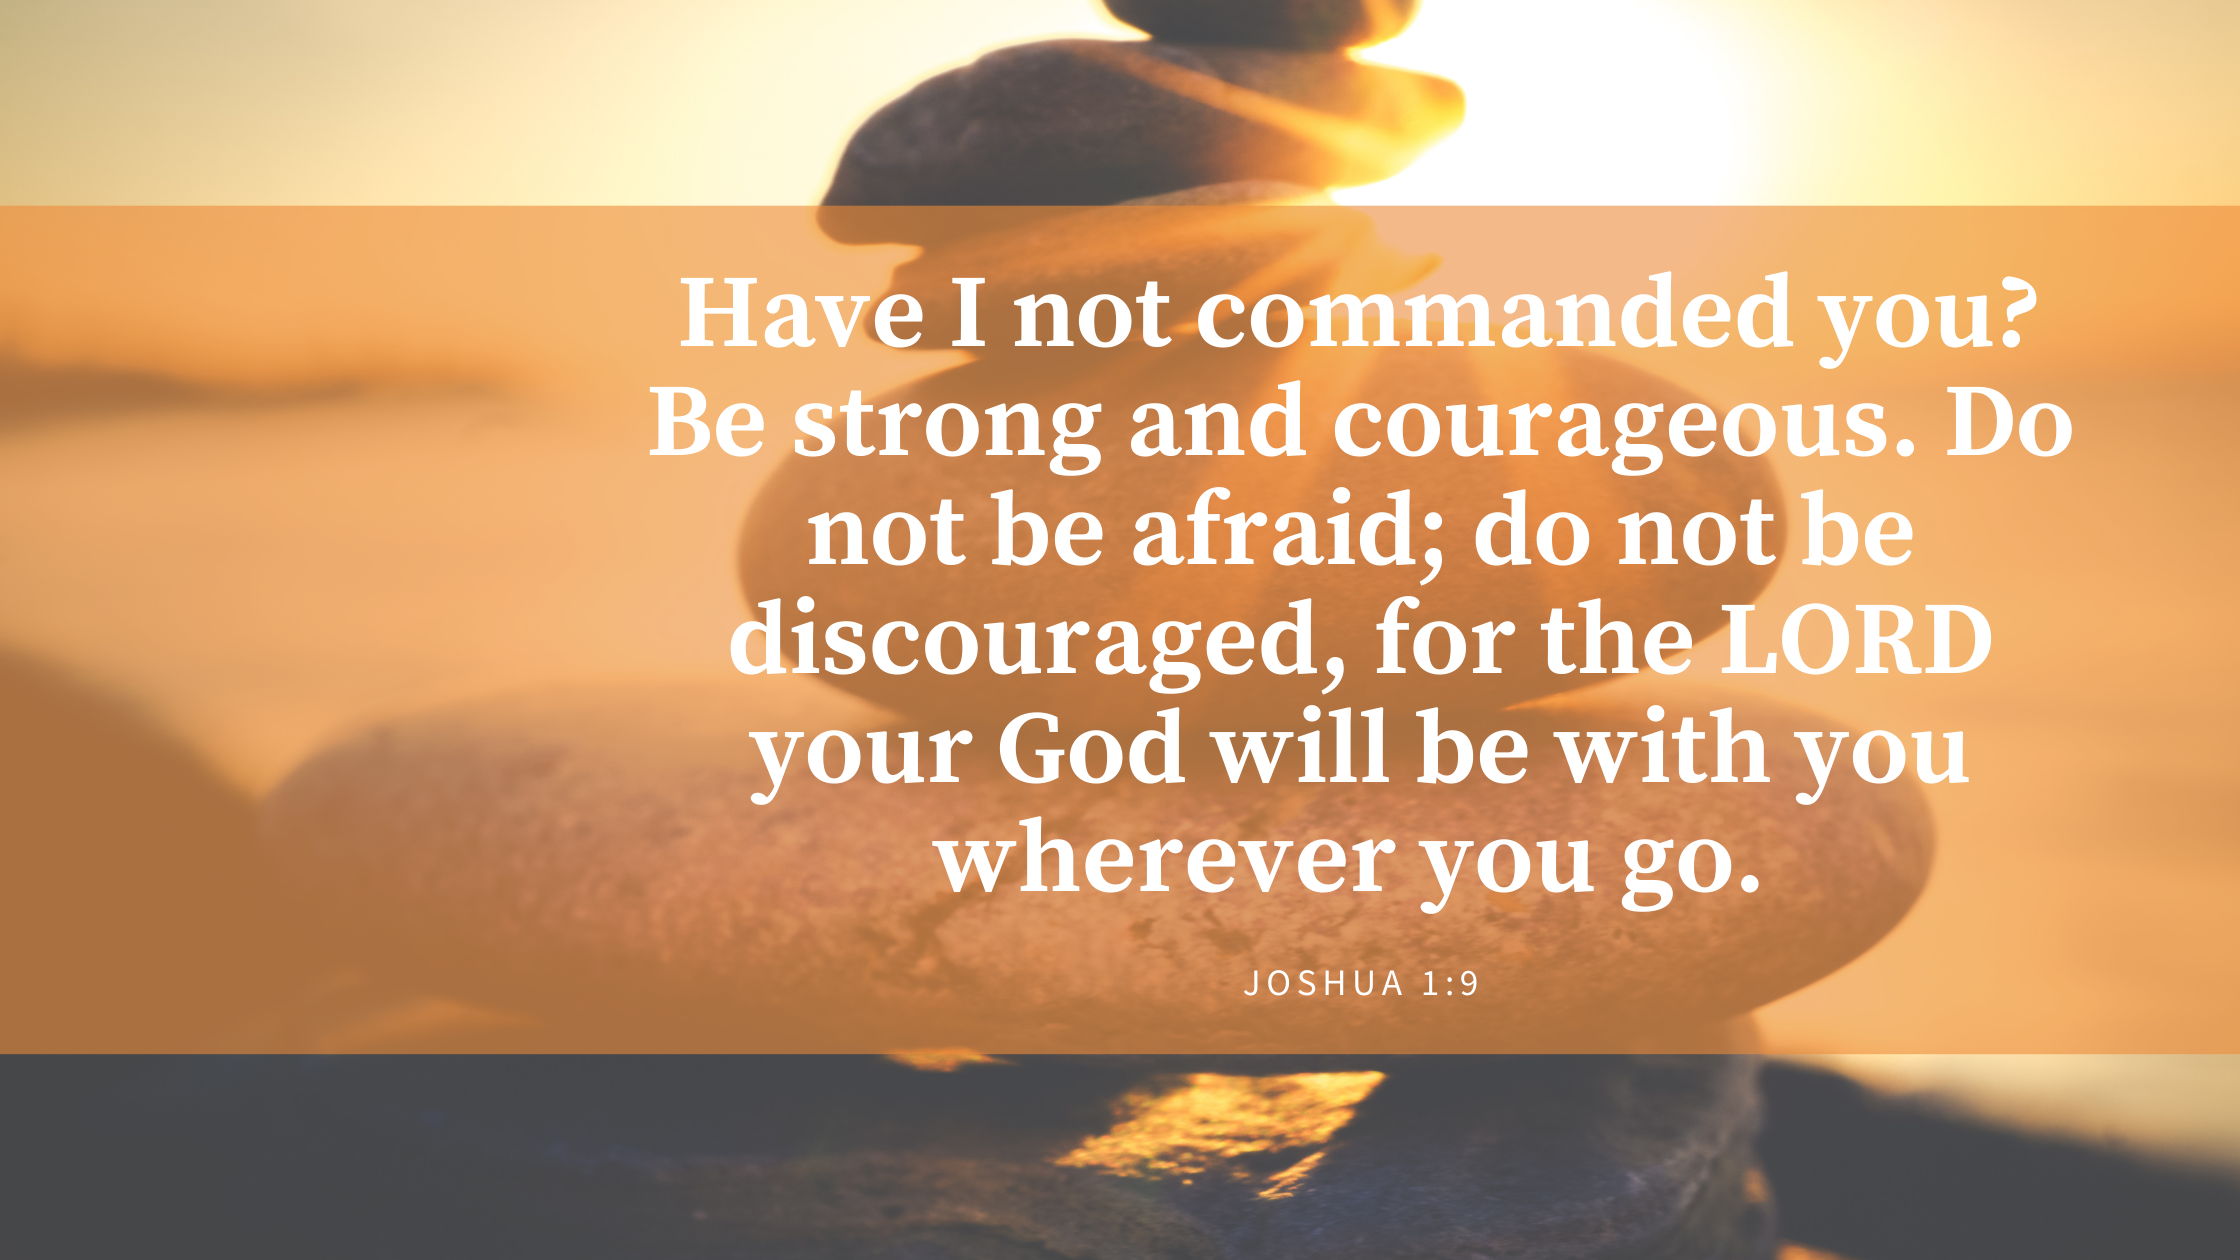 9 Have I not commanded you? Be strong and courageous. Do not be afraid; do not be discouraged, for the LORD your God will be with you wherever you go.